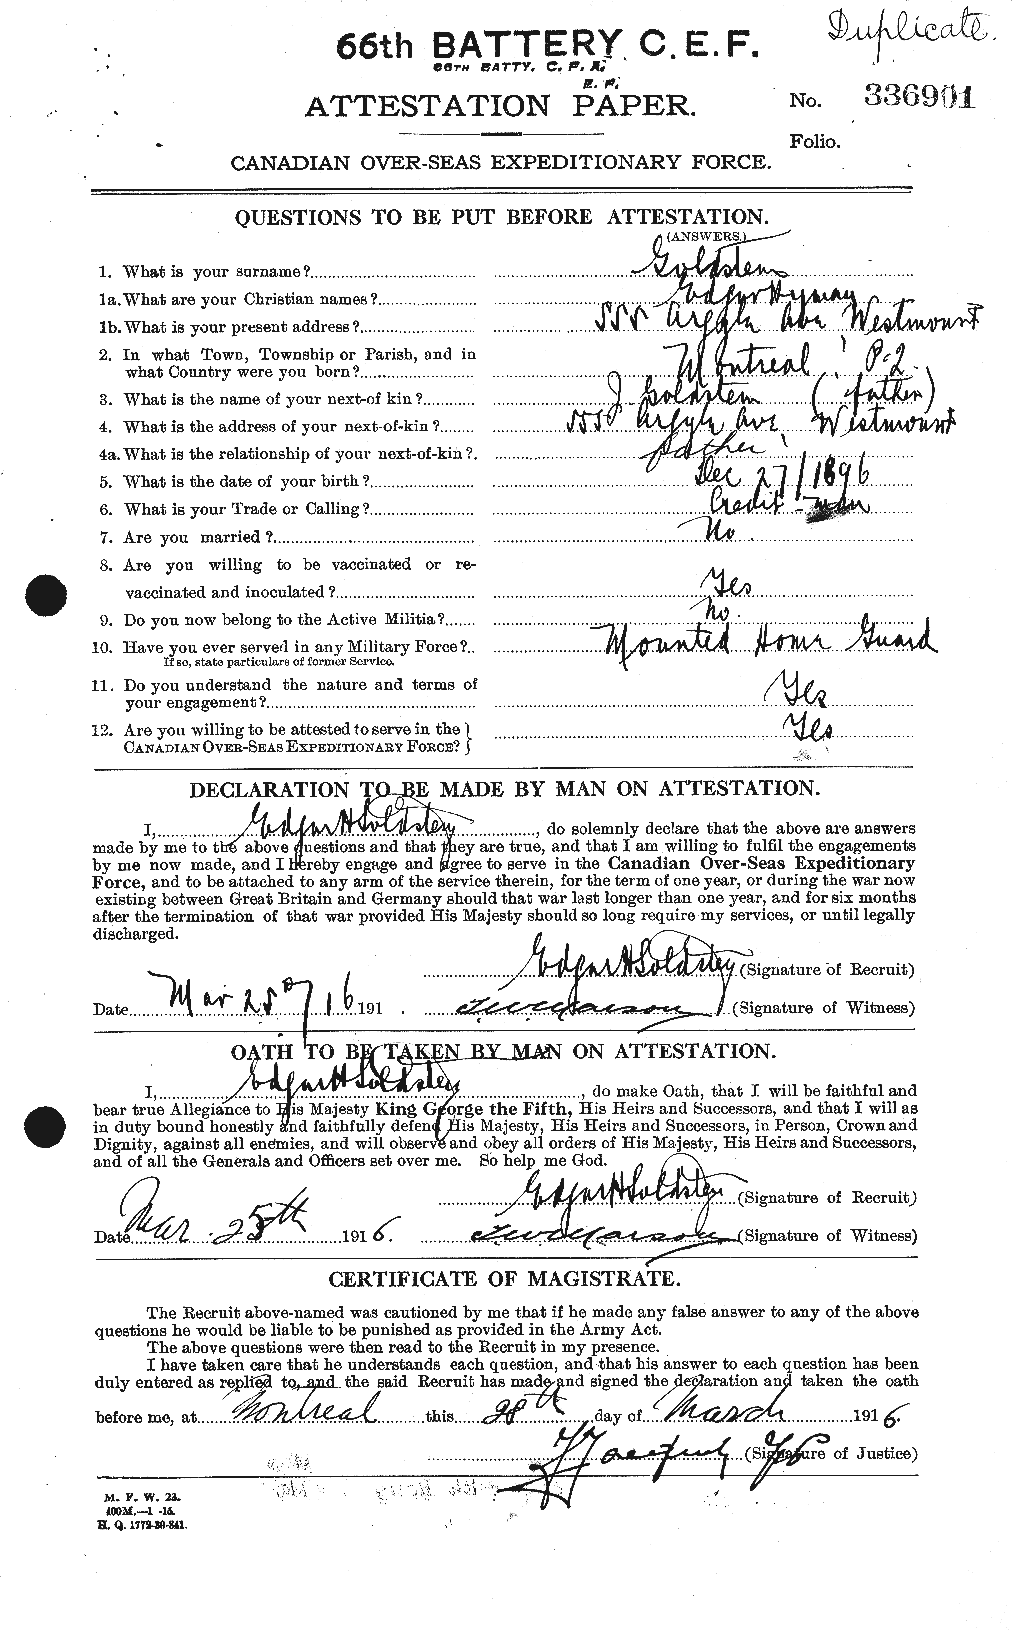 Personnel Records of the First World War - CEF 354118a